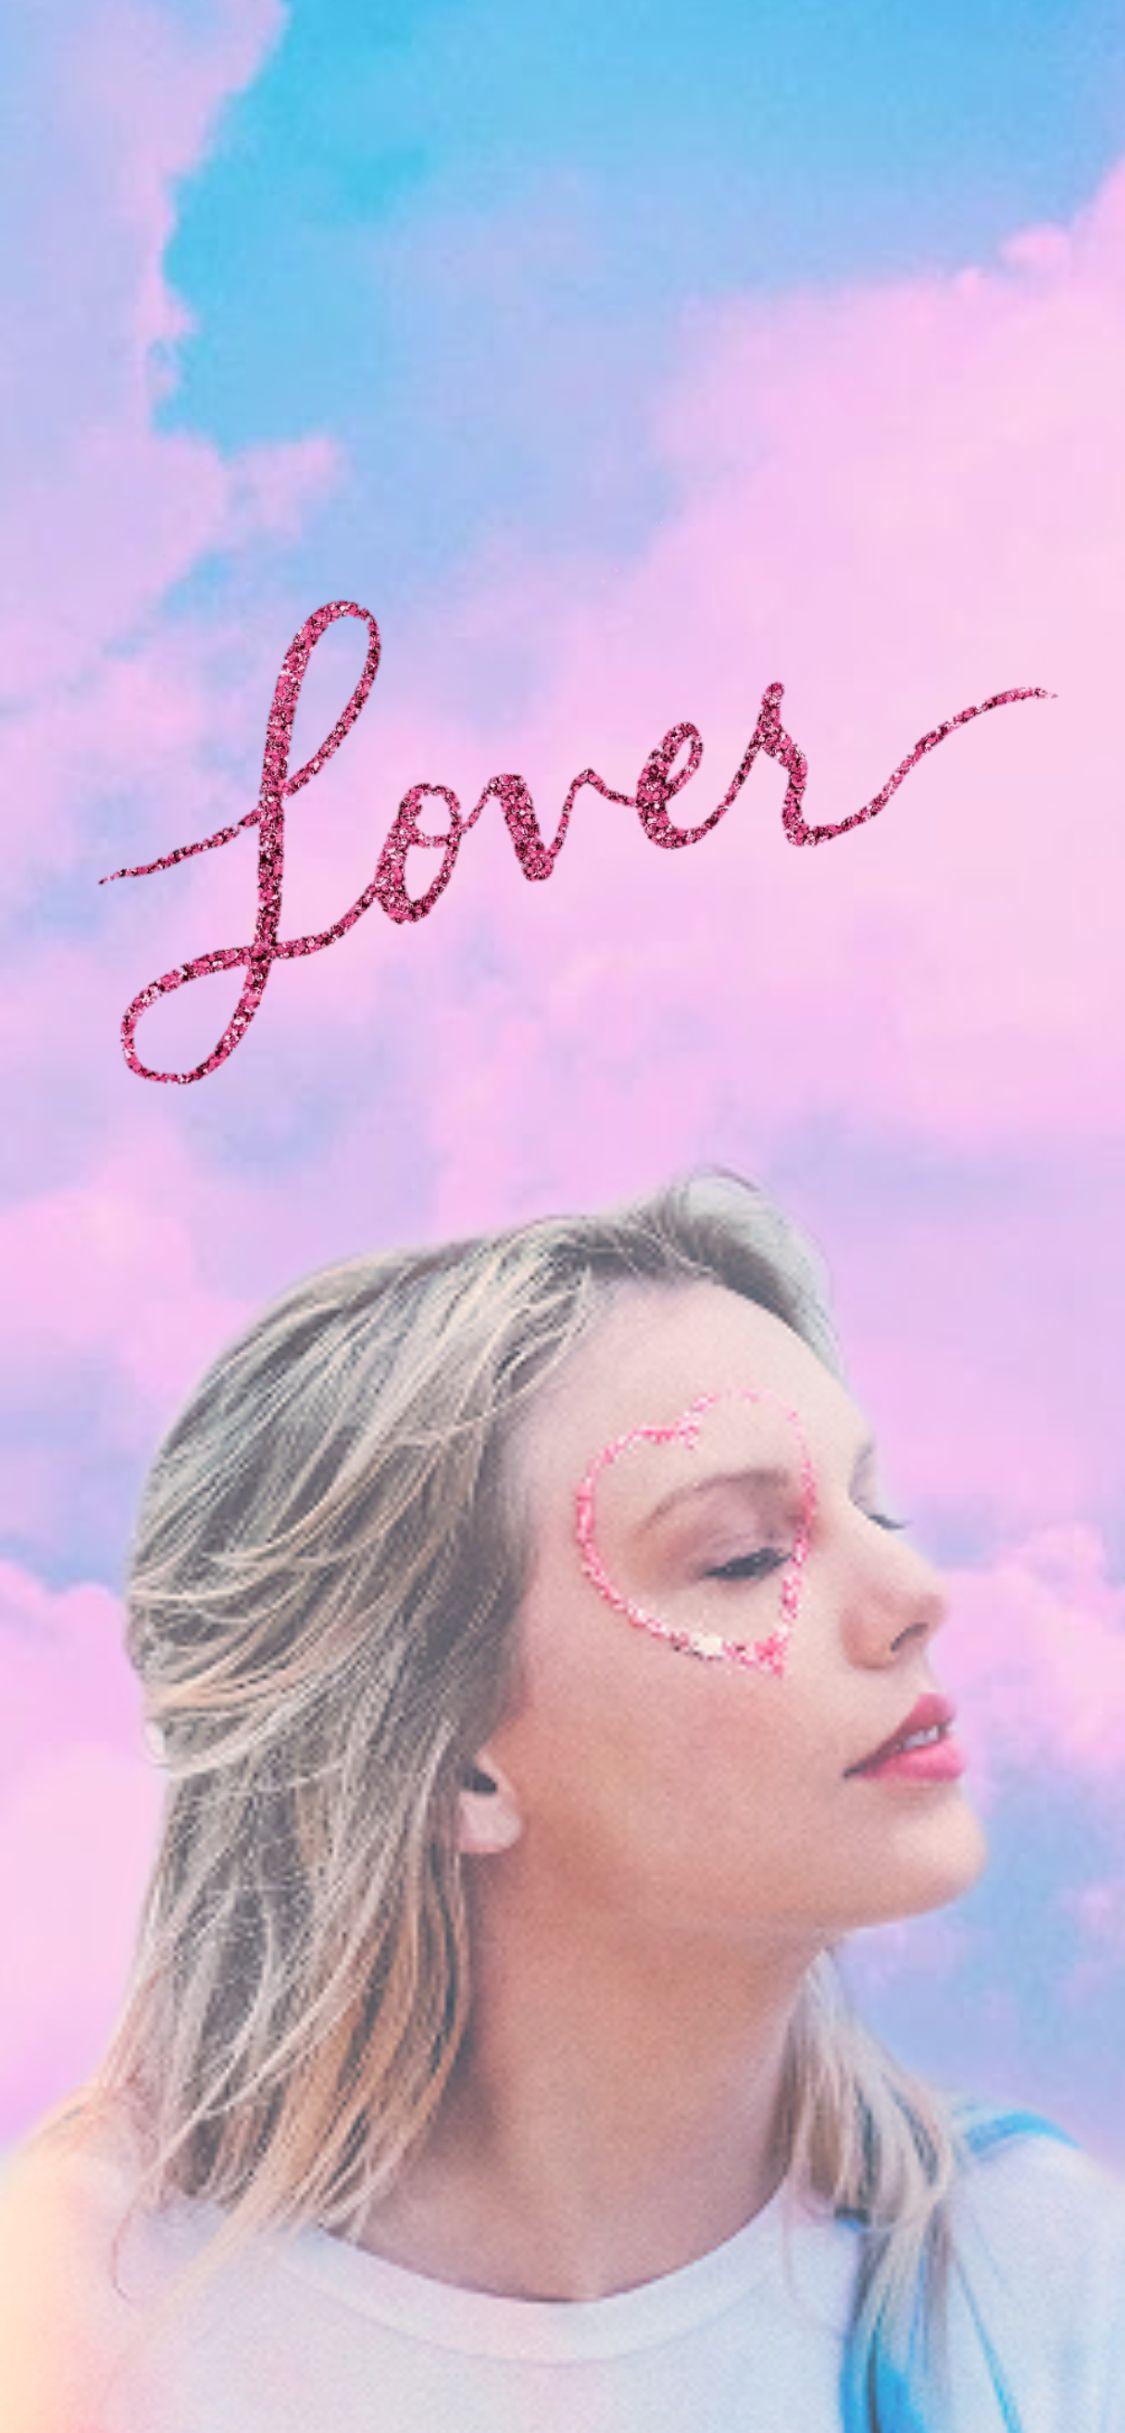 Taylor Swift Lover Wallpaper Iphone Udin